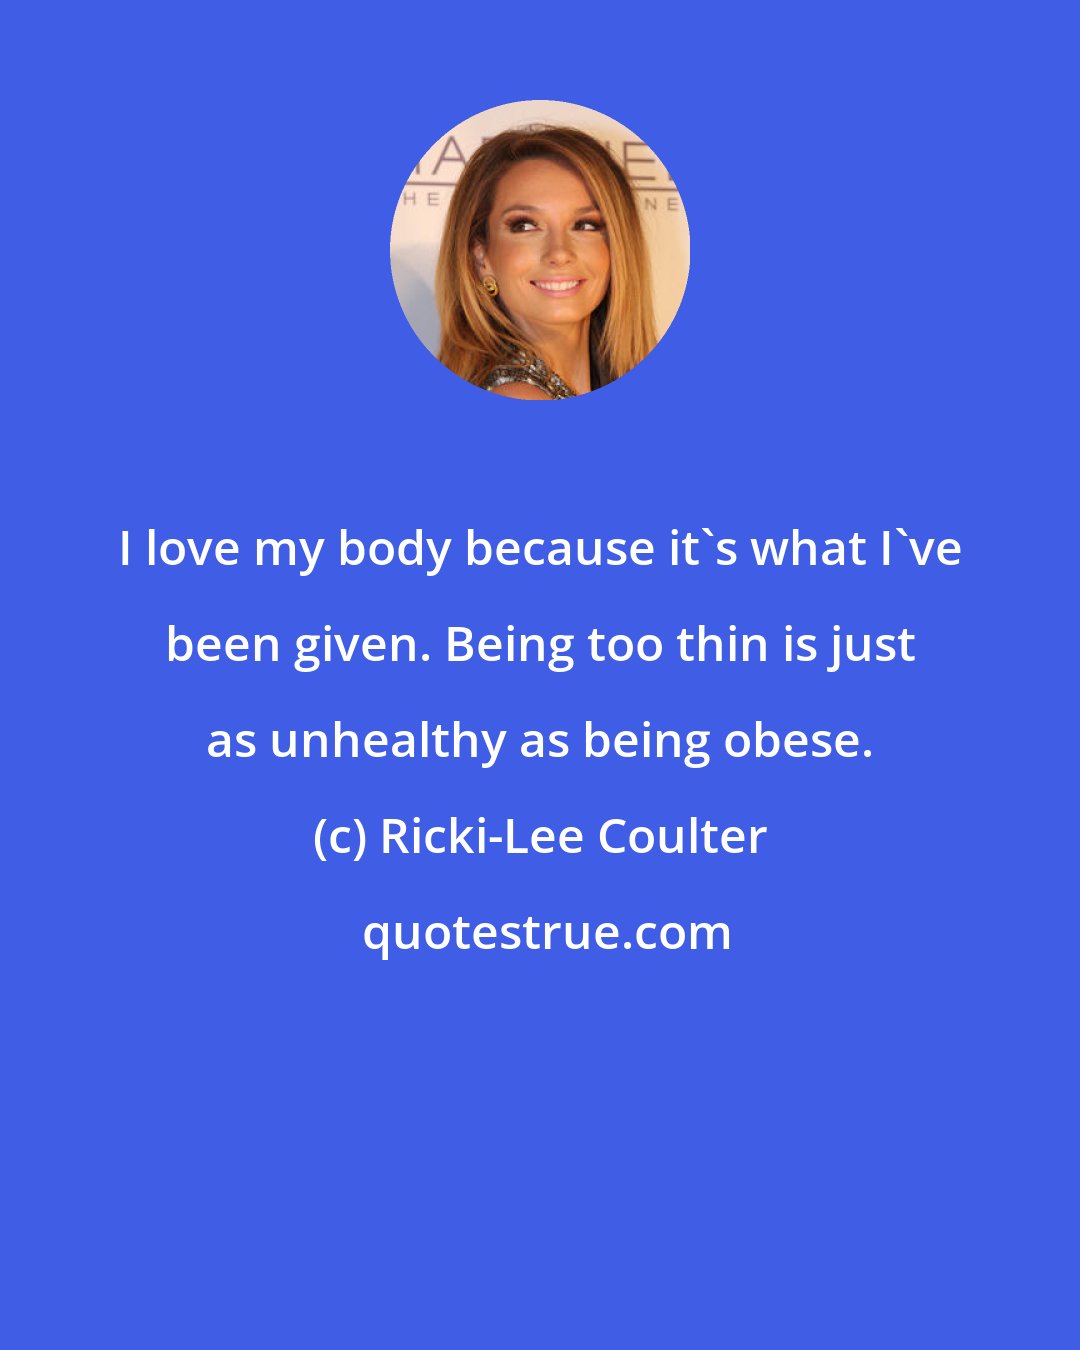 Ricki-Lee Coulter: I love my body because it's what I've been given. Being too thin is just as unhealthy as being obese.